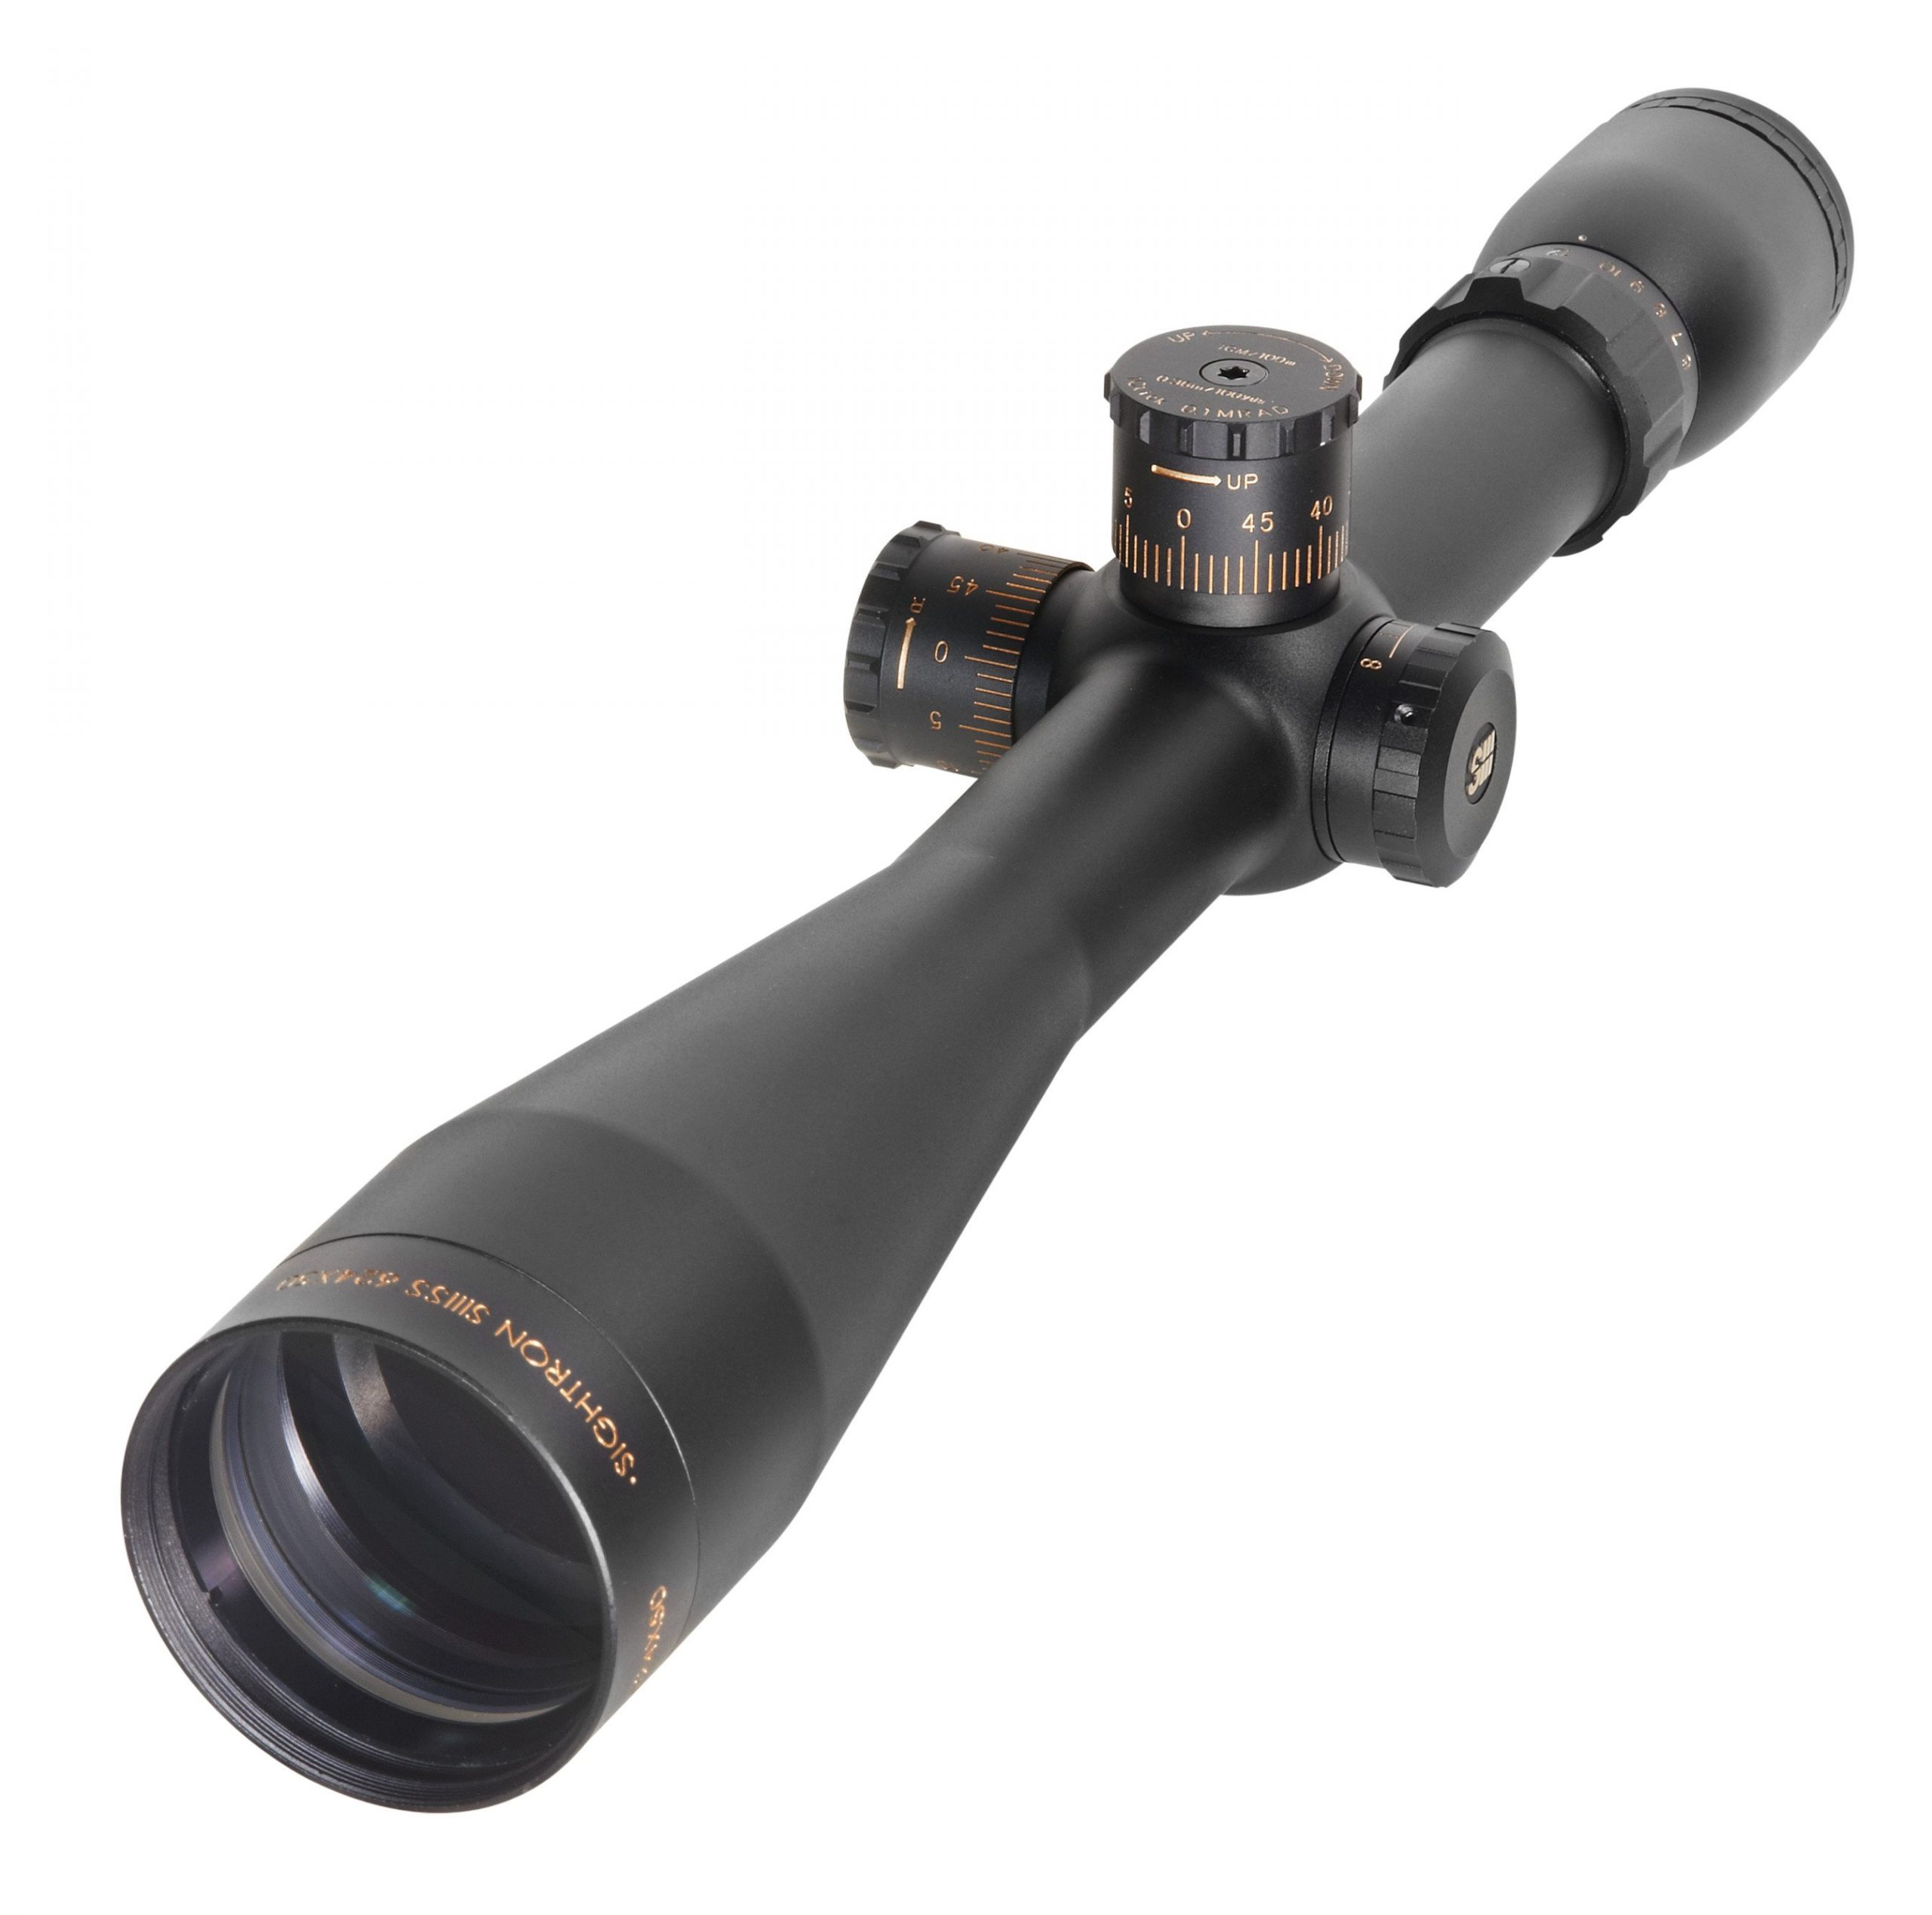 Sightron SIII 6-24x50 First Focal Plane FFP Rifle Scope MRAD Mil-Hash Reticle #25007 - Australian Tactical Precision